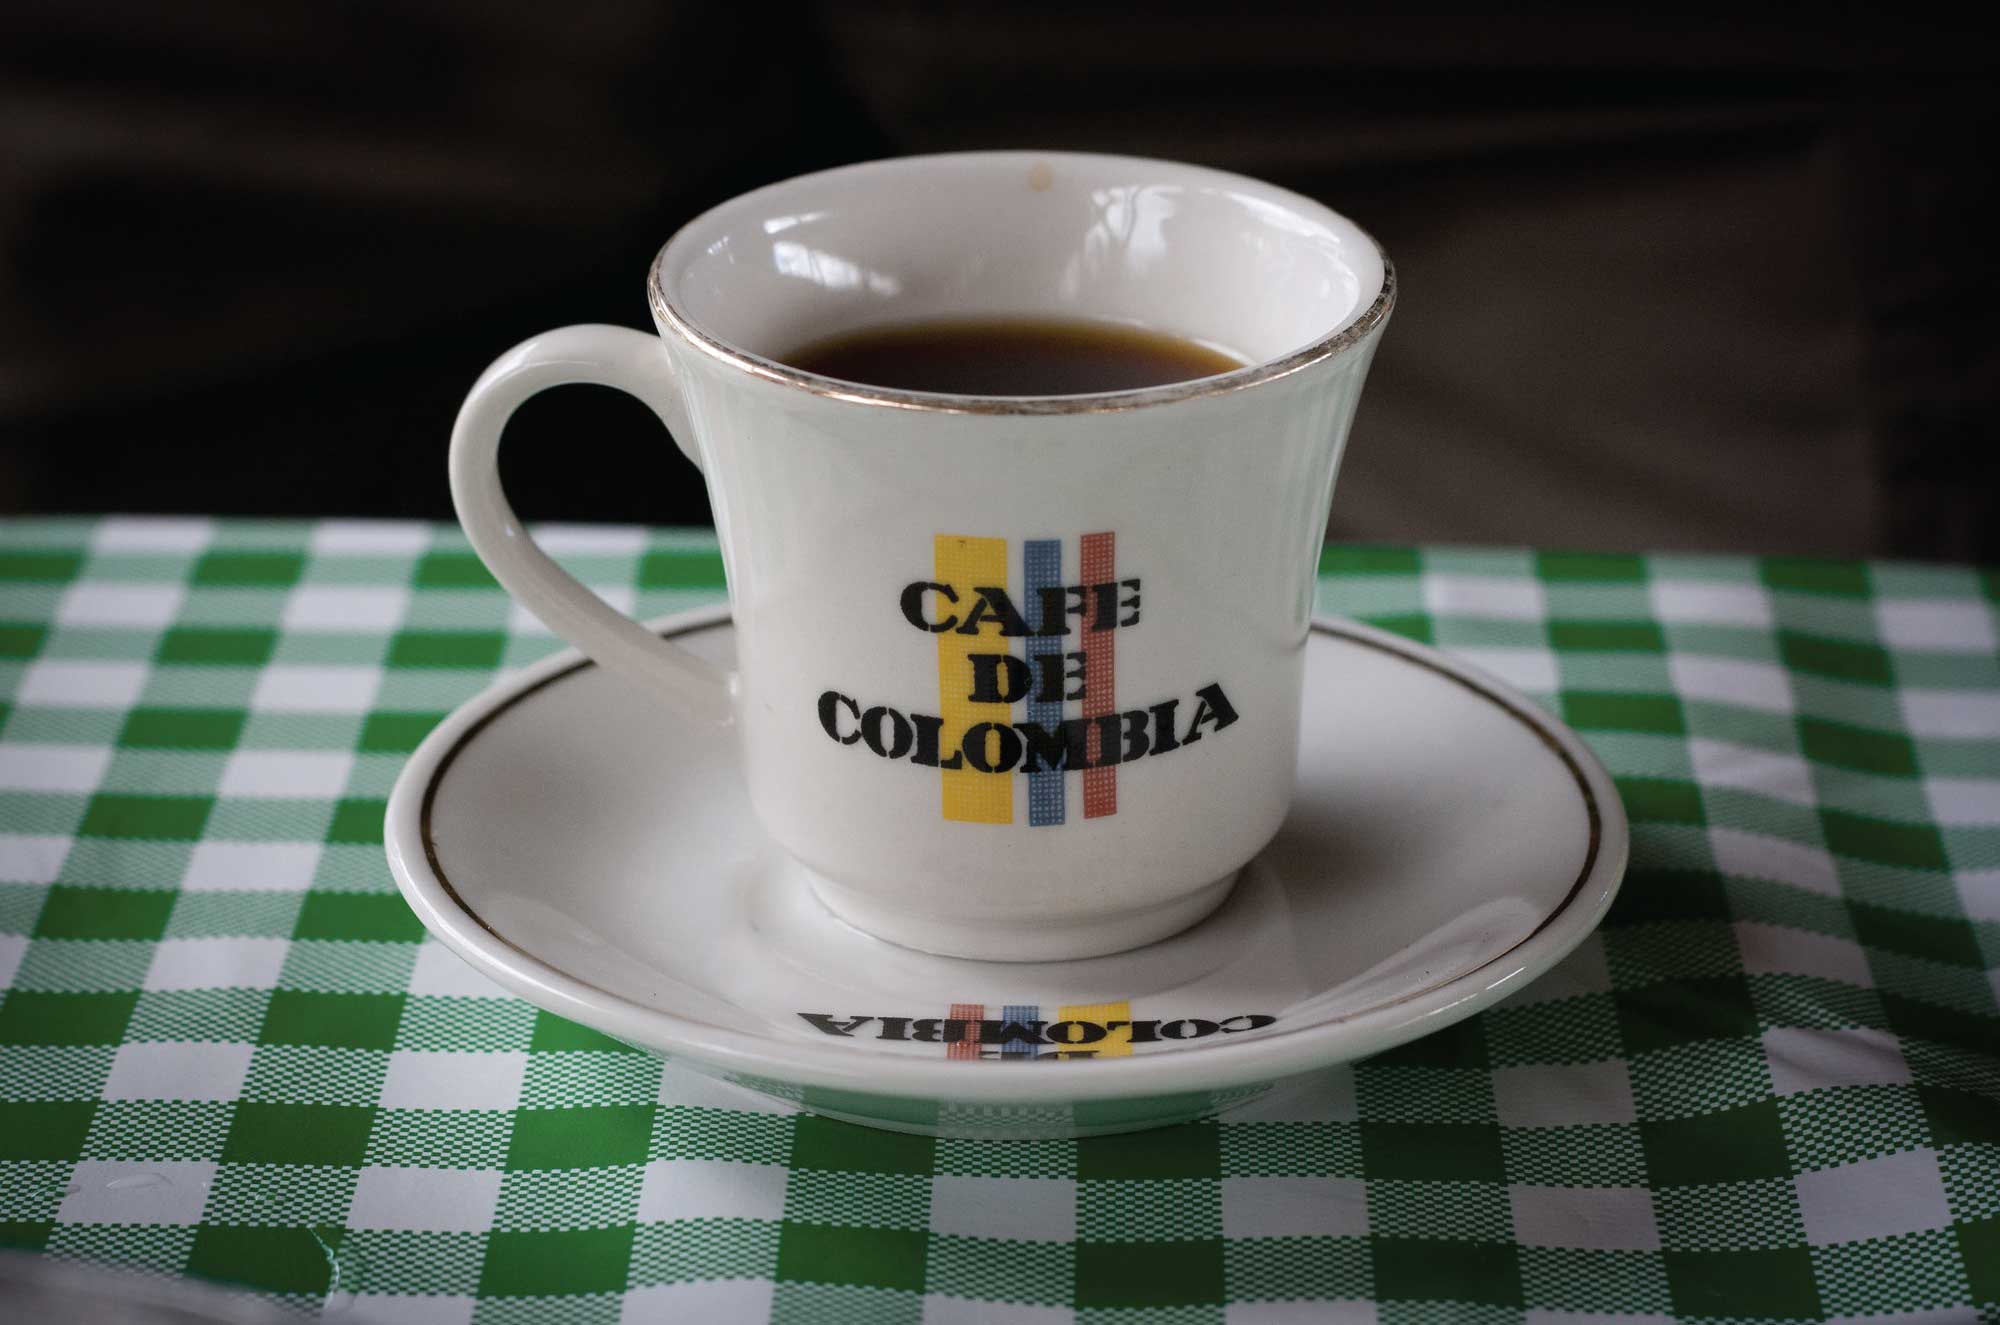 Which Colombian department produces the most coffee?